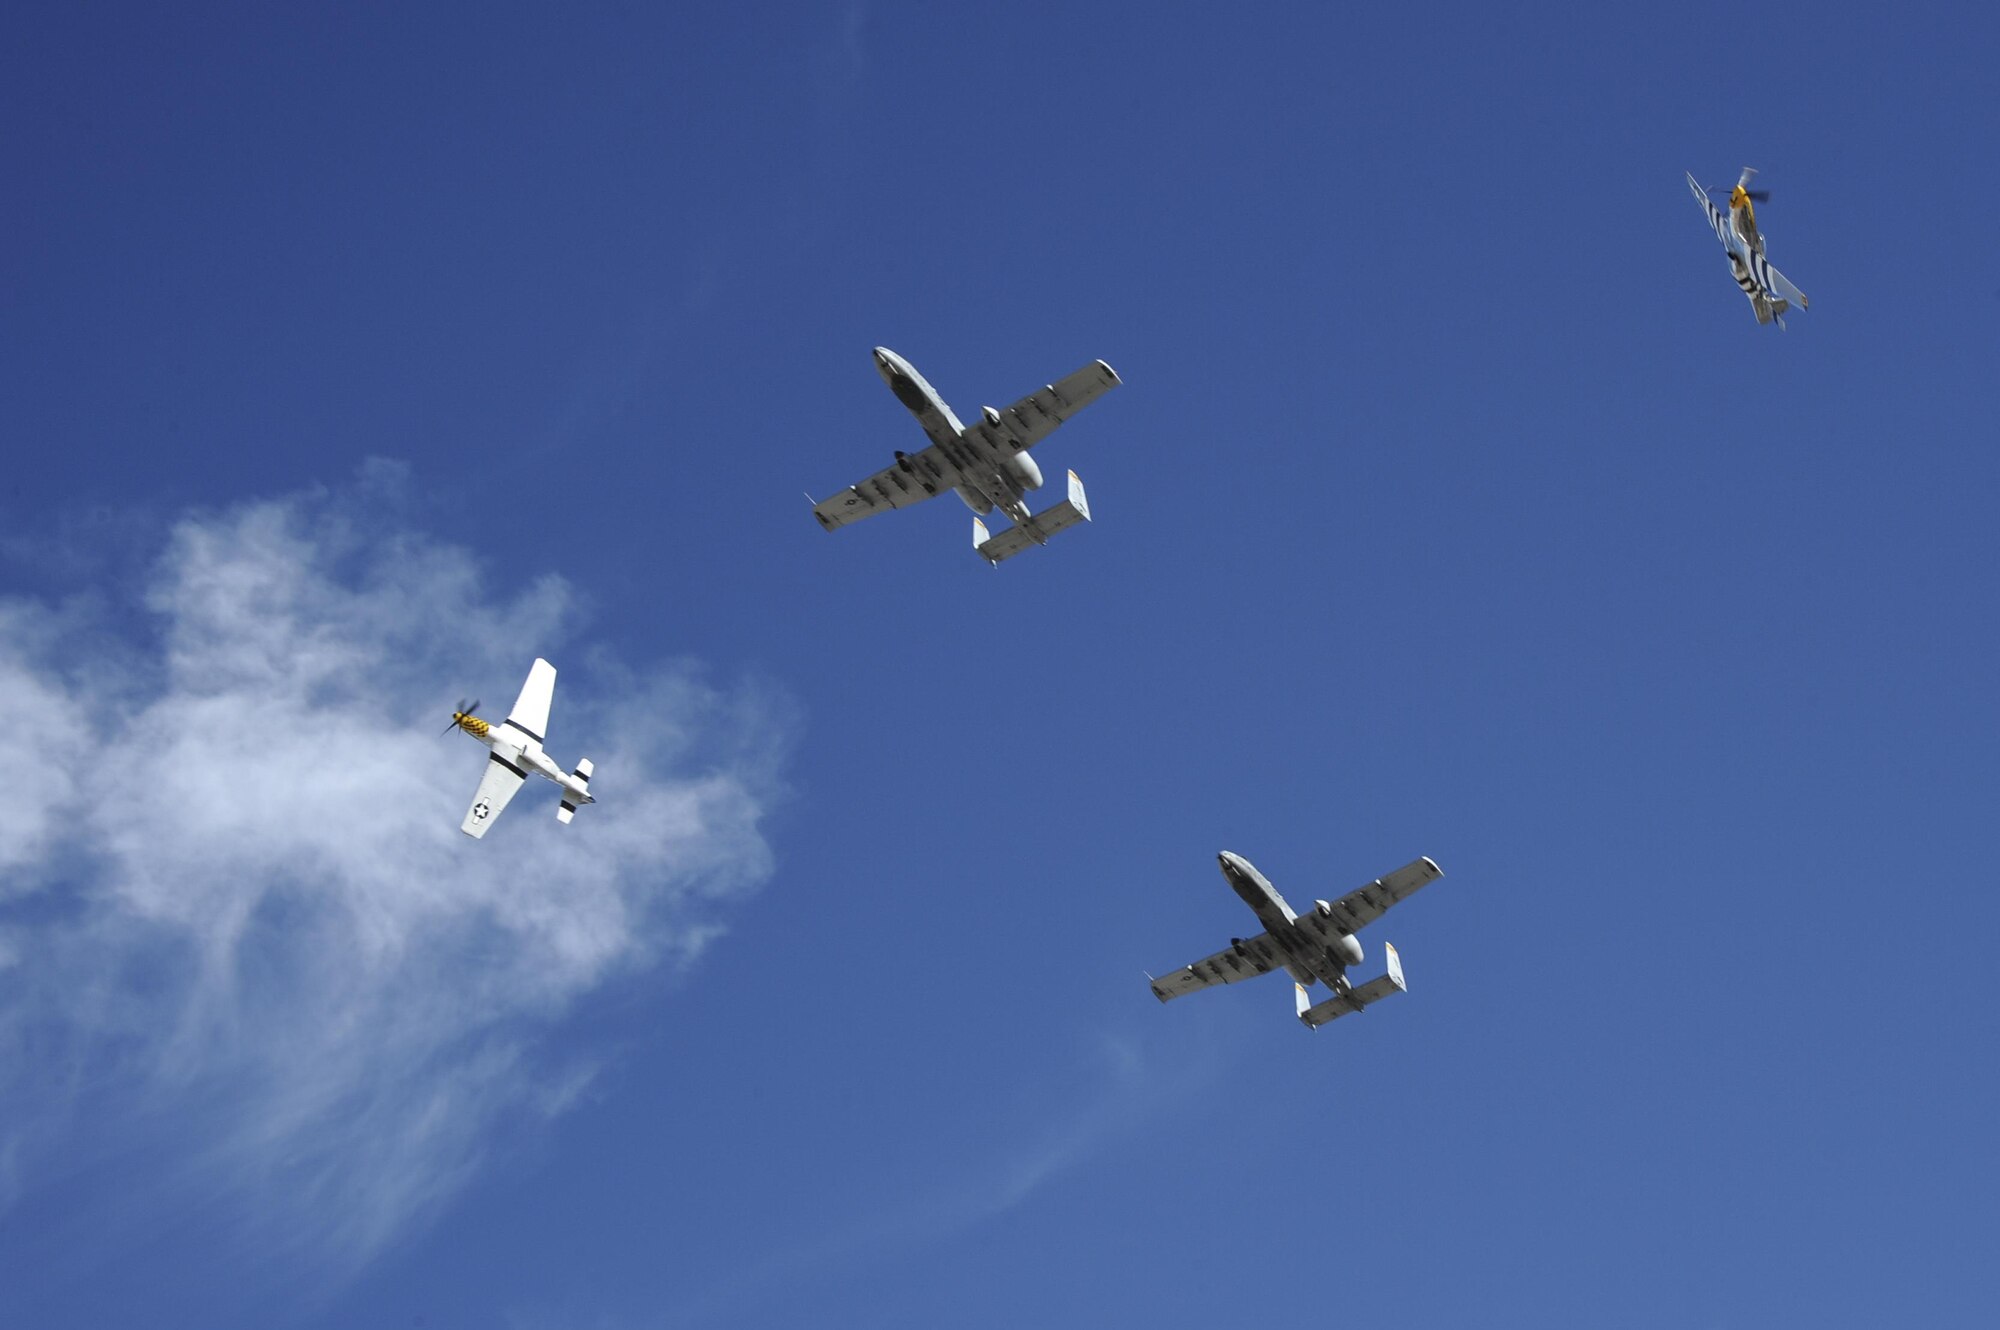 Two U.S. Air Force A-10C Thunderbolt IIs, a P-51 Mustang and a P-40 Warhawk fly in formation during the 2017 Heritage Flight Training and Certification Course at Davis-Monthan Air Force Base, Ariz., Feb. 10, 2017. The modern aircraft that participated in this year's HFTCC were the F-35 Lightning II, the F-22 Raptor, F-16 Fighting Falcon and the A-10C Thunderbolt II. (U.S. Air Force photo by Airman 1st Class Mya M. Crosby)